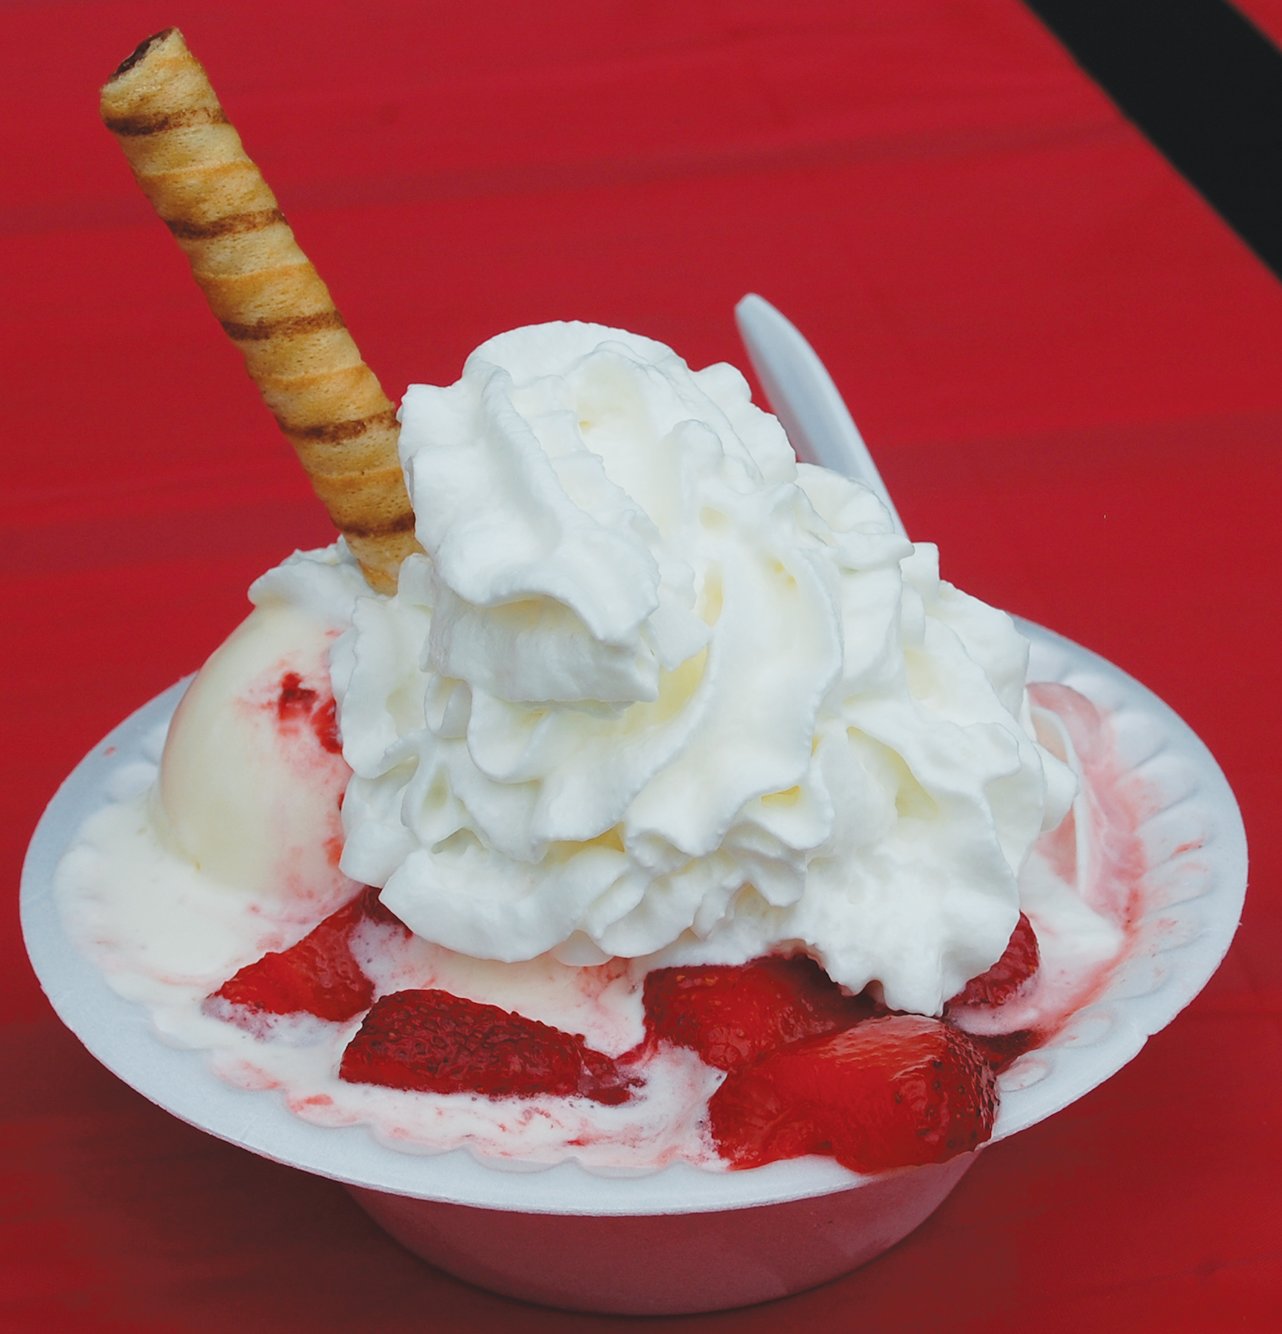 Strawberry Shortcake is a crowd favorite at the Strawberry Festival.